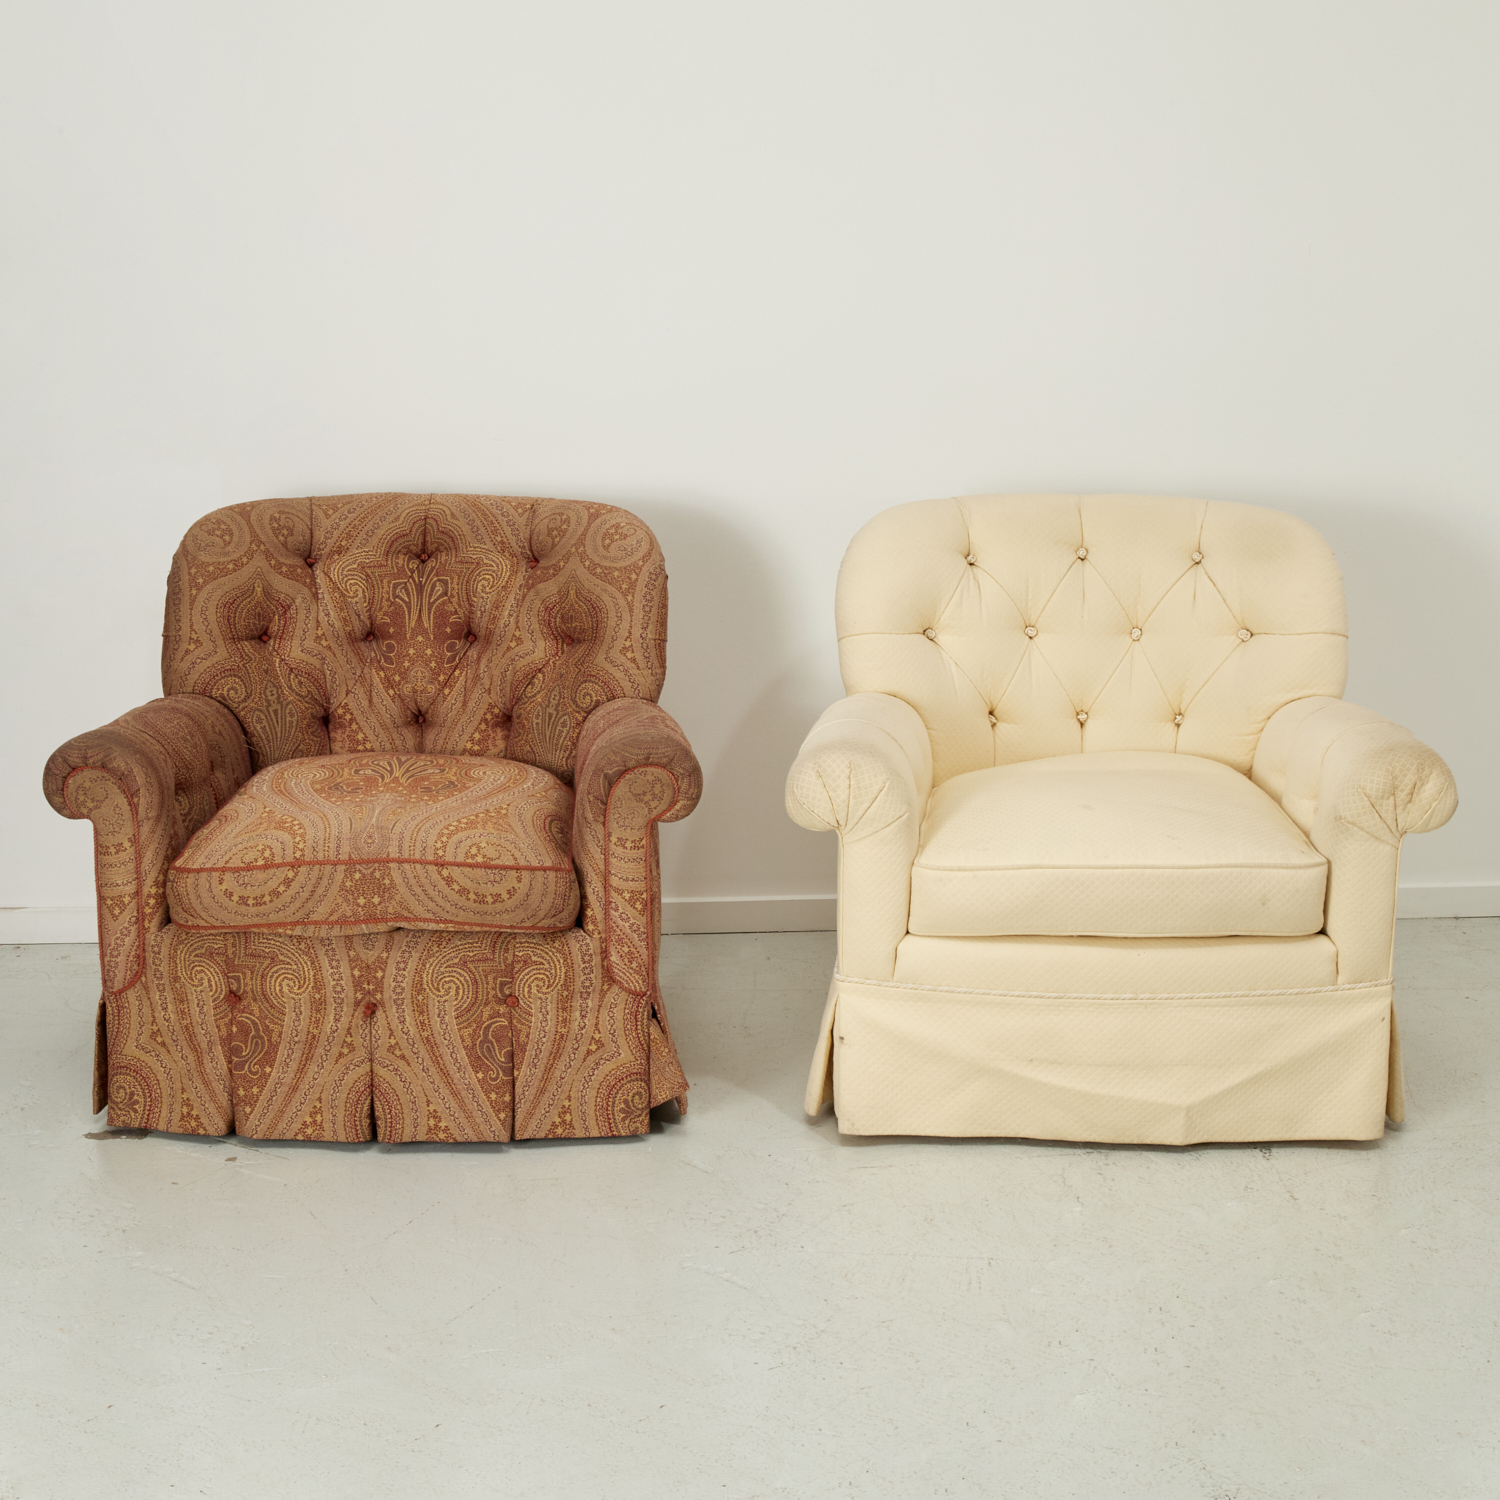 NEAR PAIR TUFTED UPHOLSTERED CLUB 361358